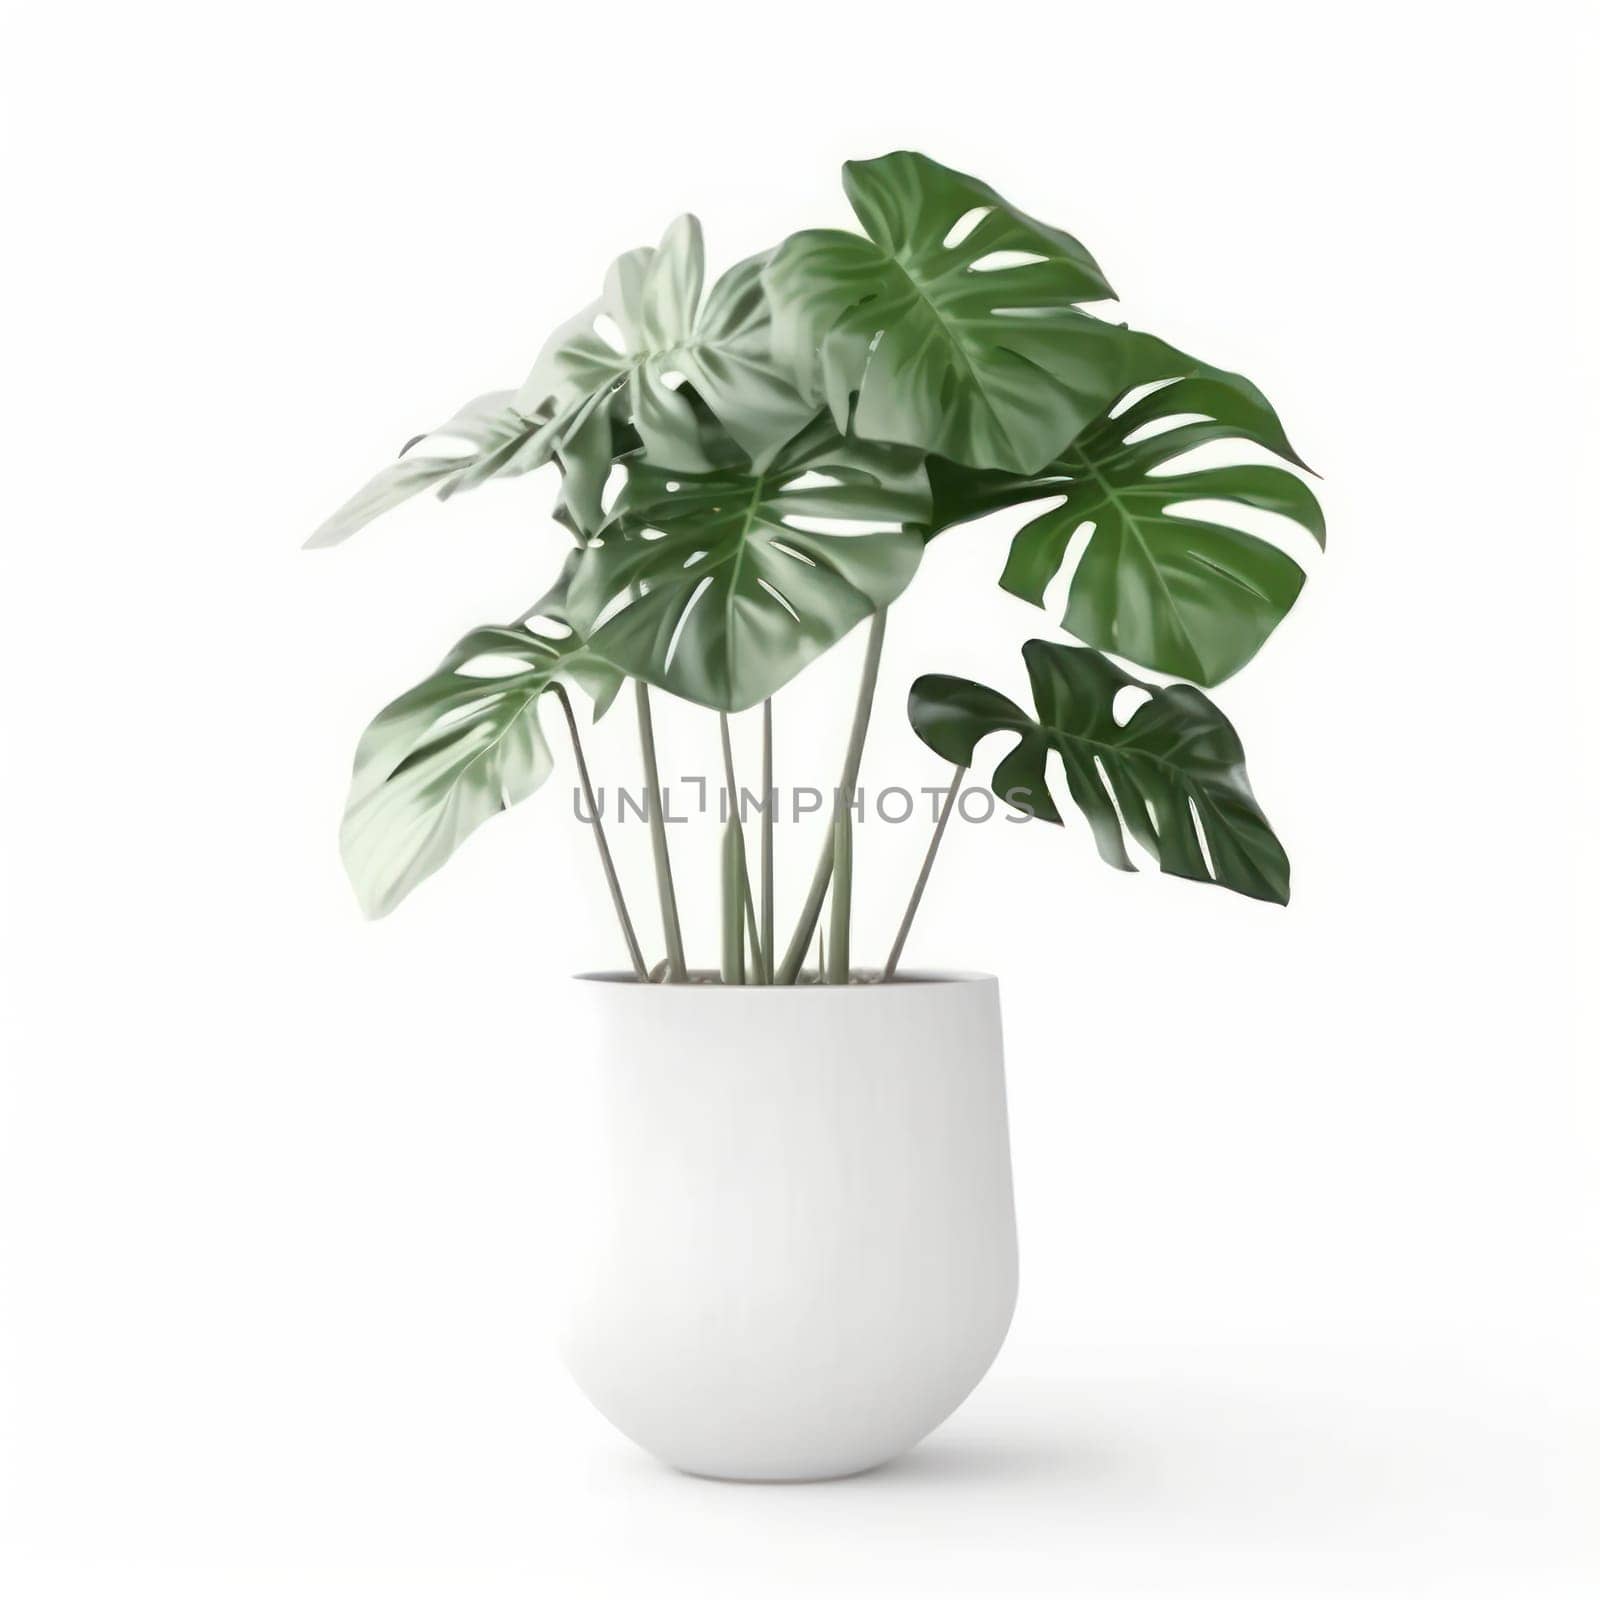 Transform your home into a tropical paradise with a beautiful monstera plant by Sorapop